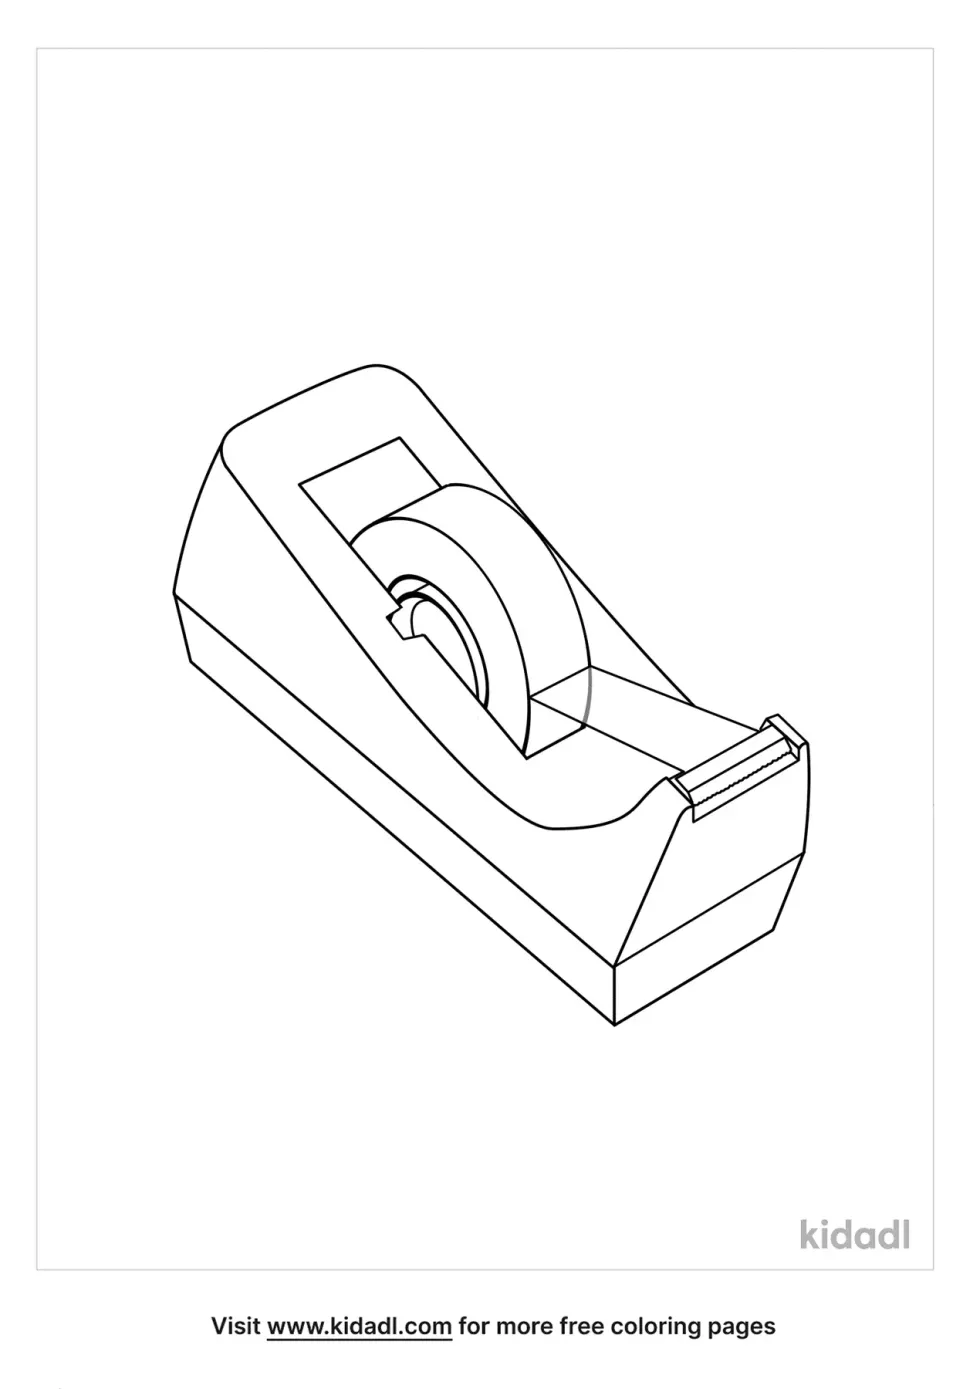 Scotch Tape Coloring Page